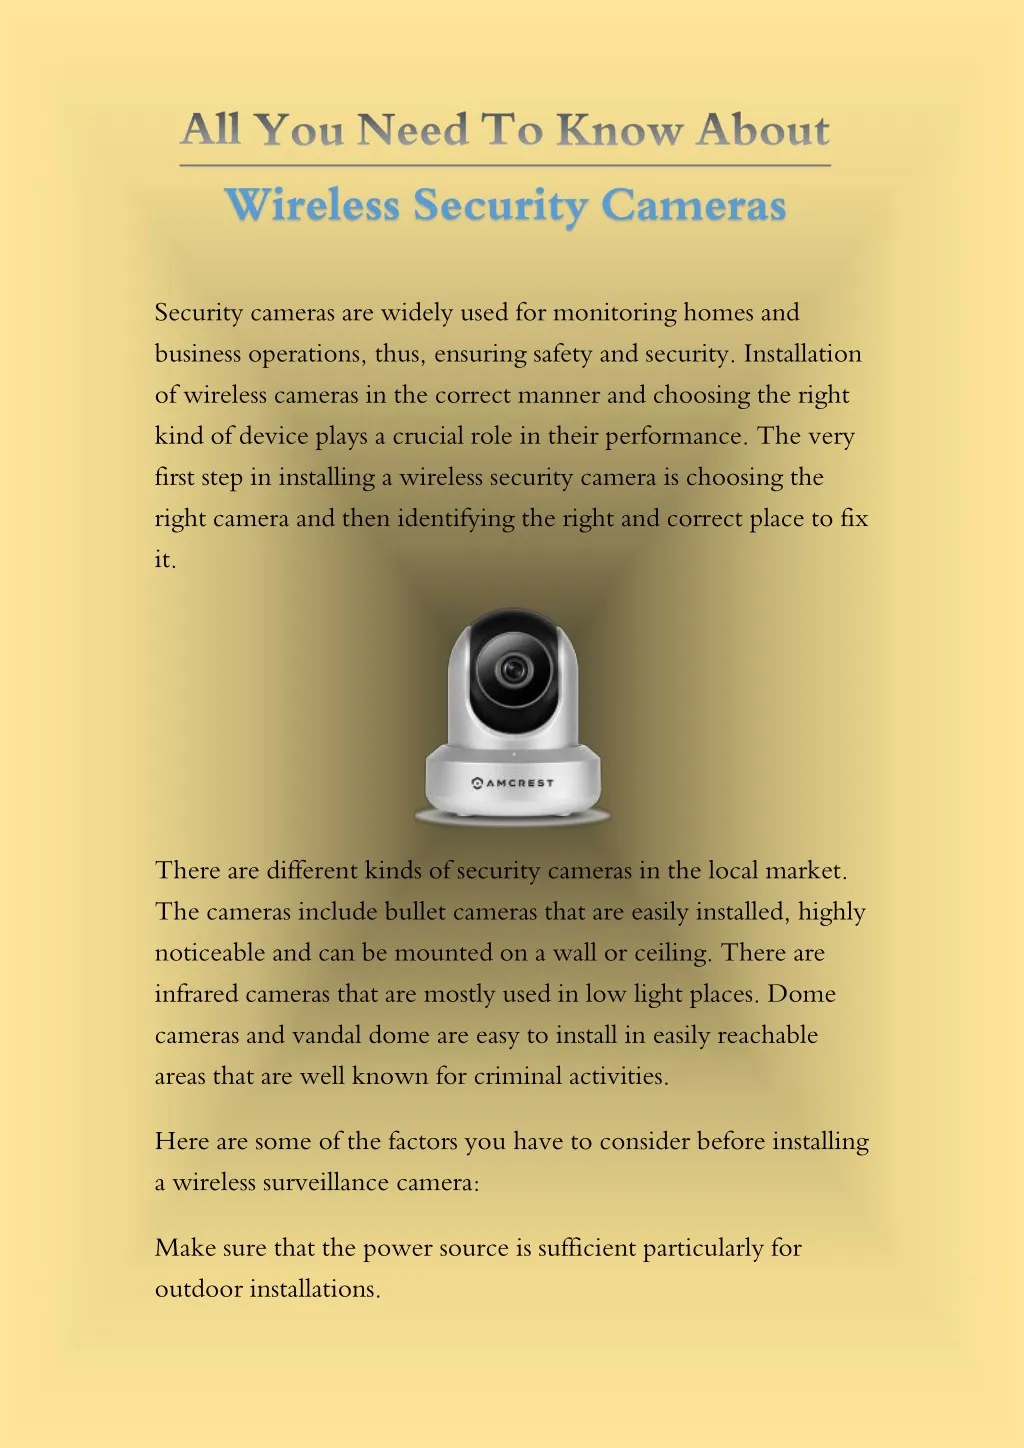 security cameras are widely used for monitoring